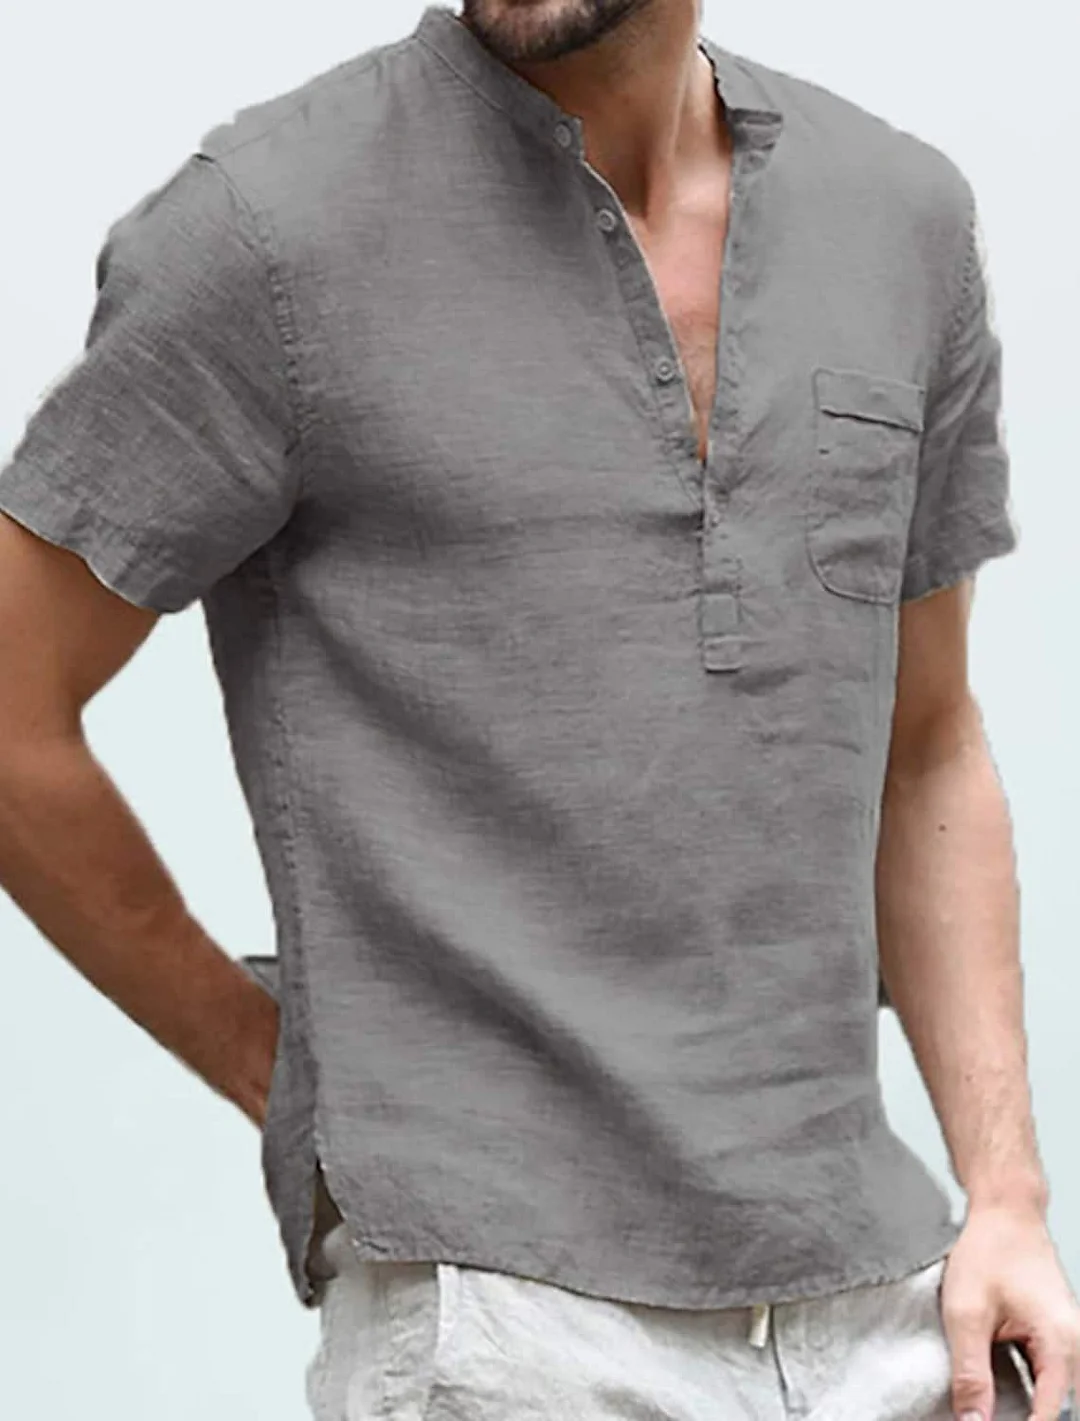 Men's T shirt Solid Colored Short Sleeve Daily Tops Cotton Basic Streetwear V Neck Gray Green White / Work Linen